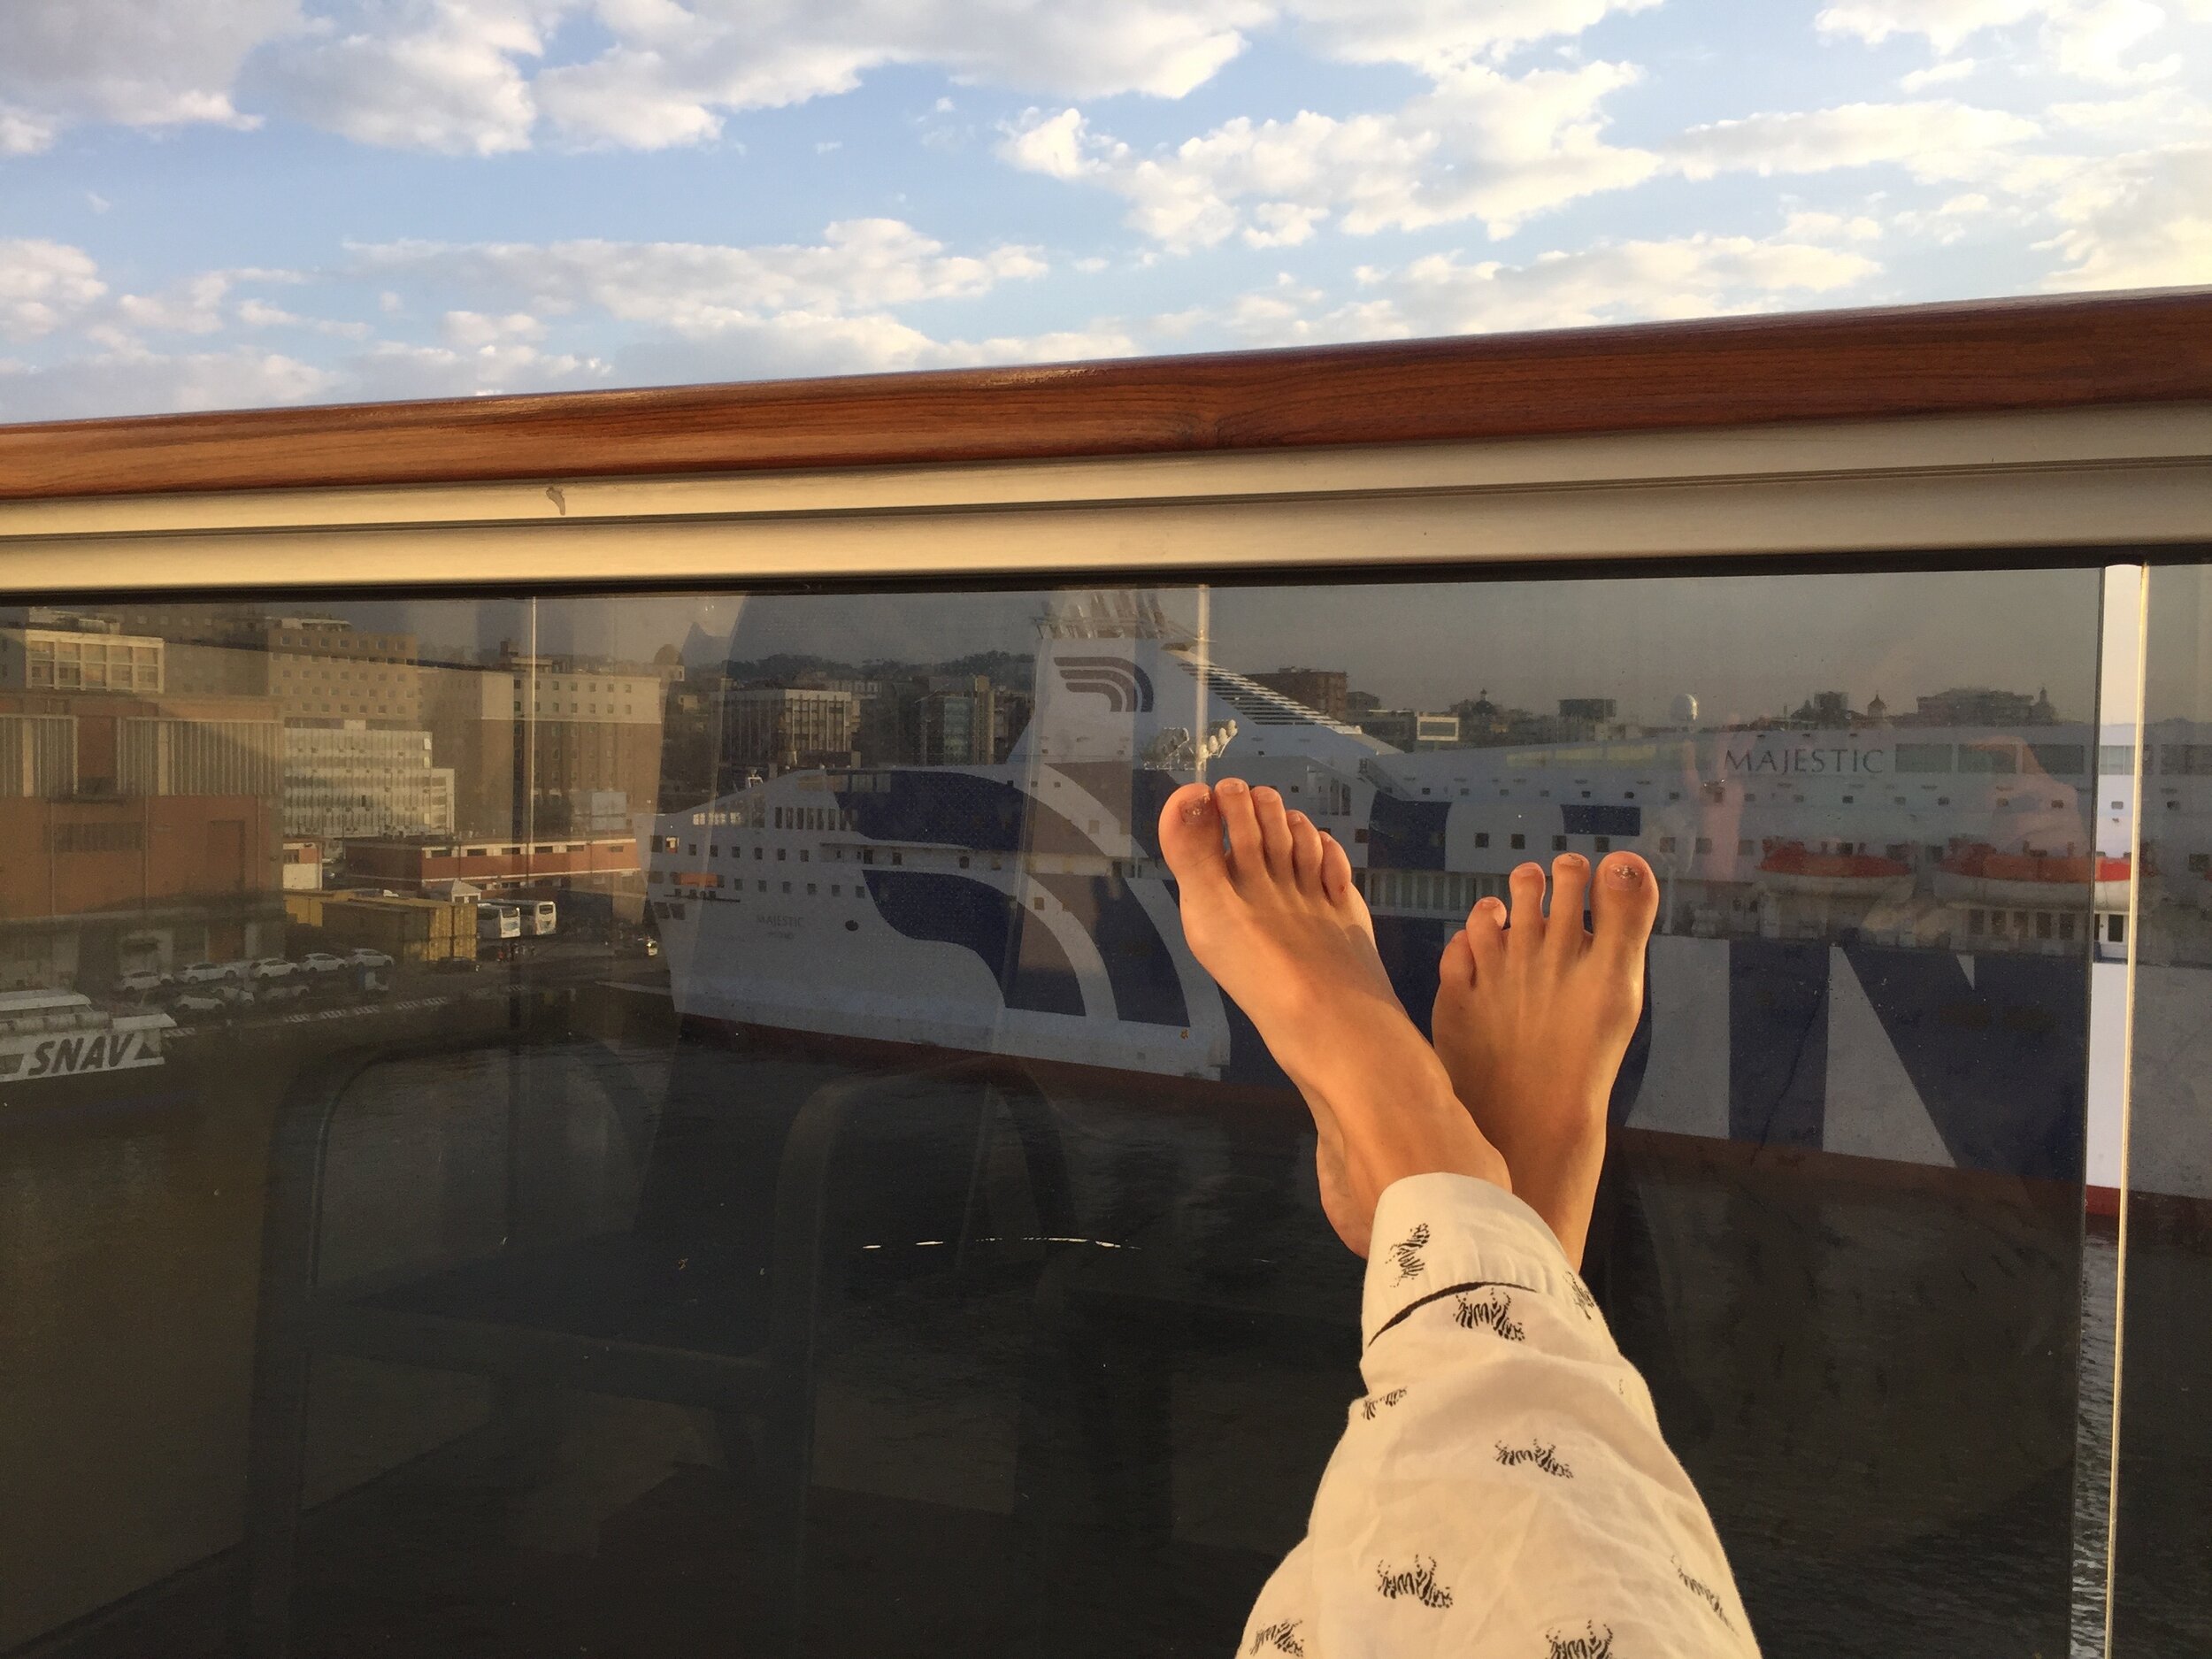 In pajamas on a cruise ship balcony...my happiest place!